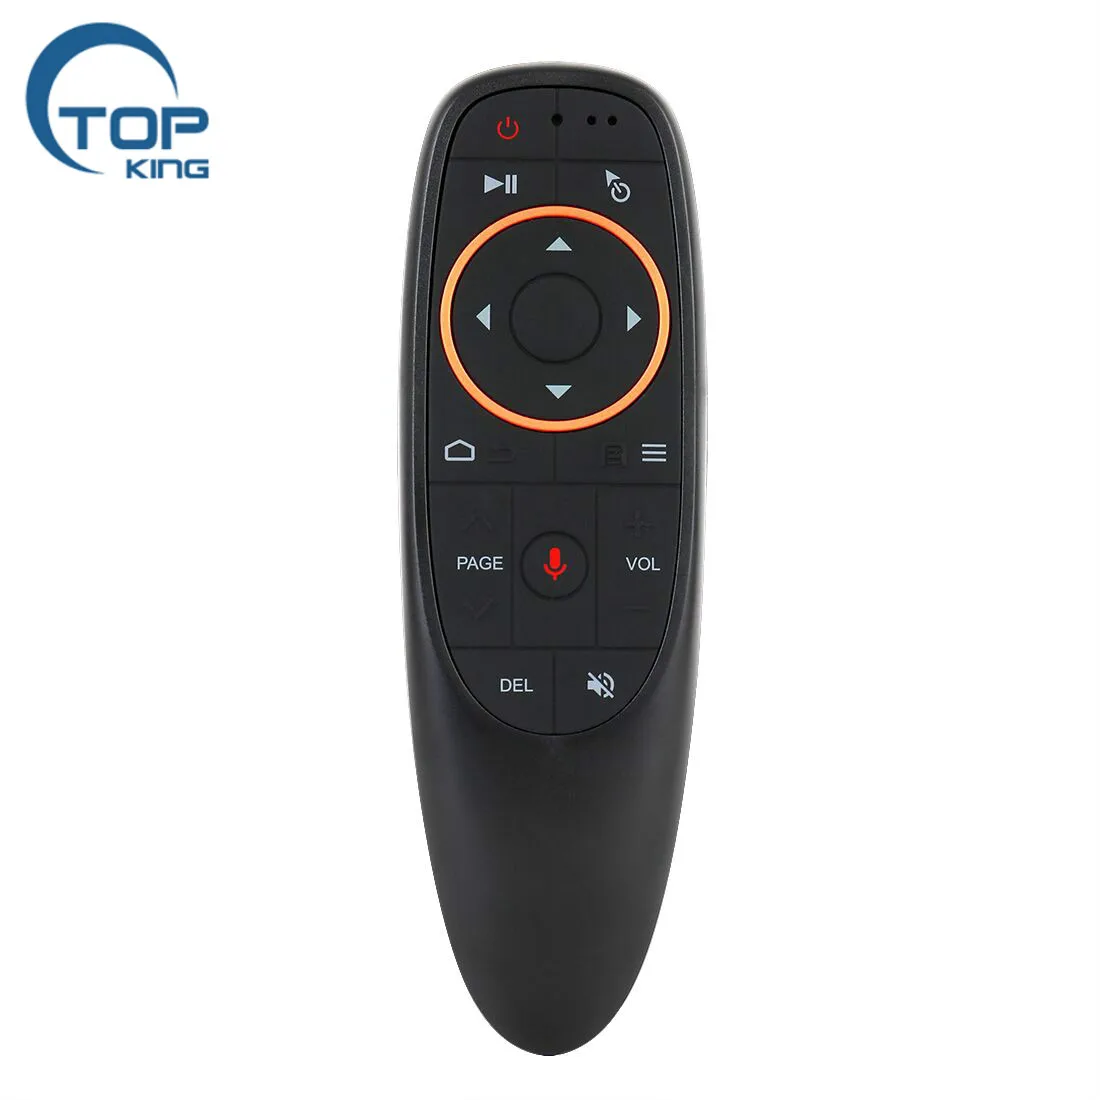 

G10 2.4G Wireless Air Mouse Voice Input 6-axis Gyroscope Android Remote Control Support Google Assistant, N/a